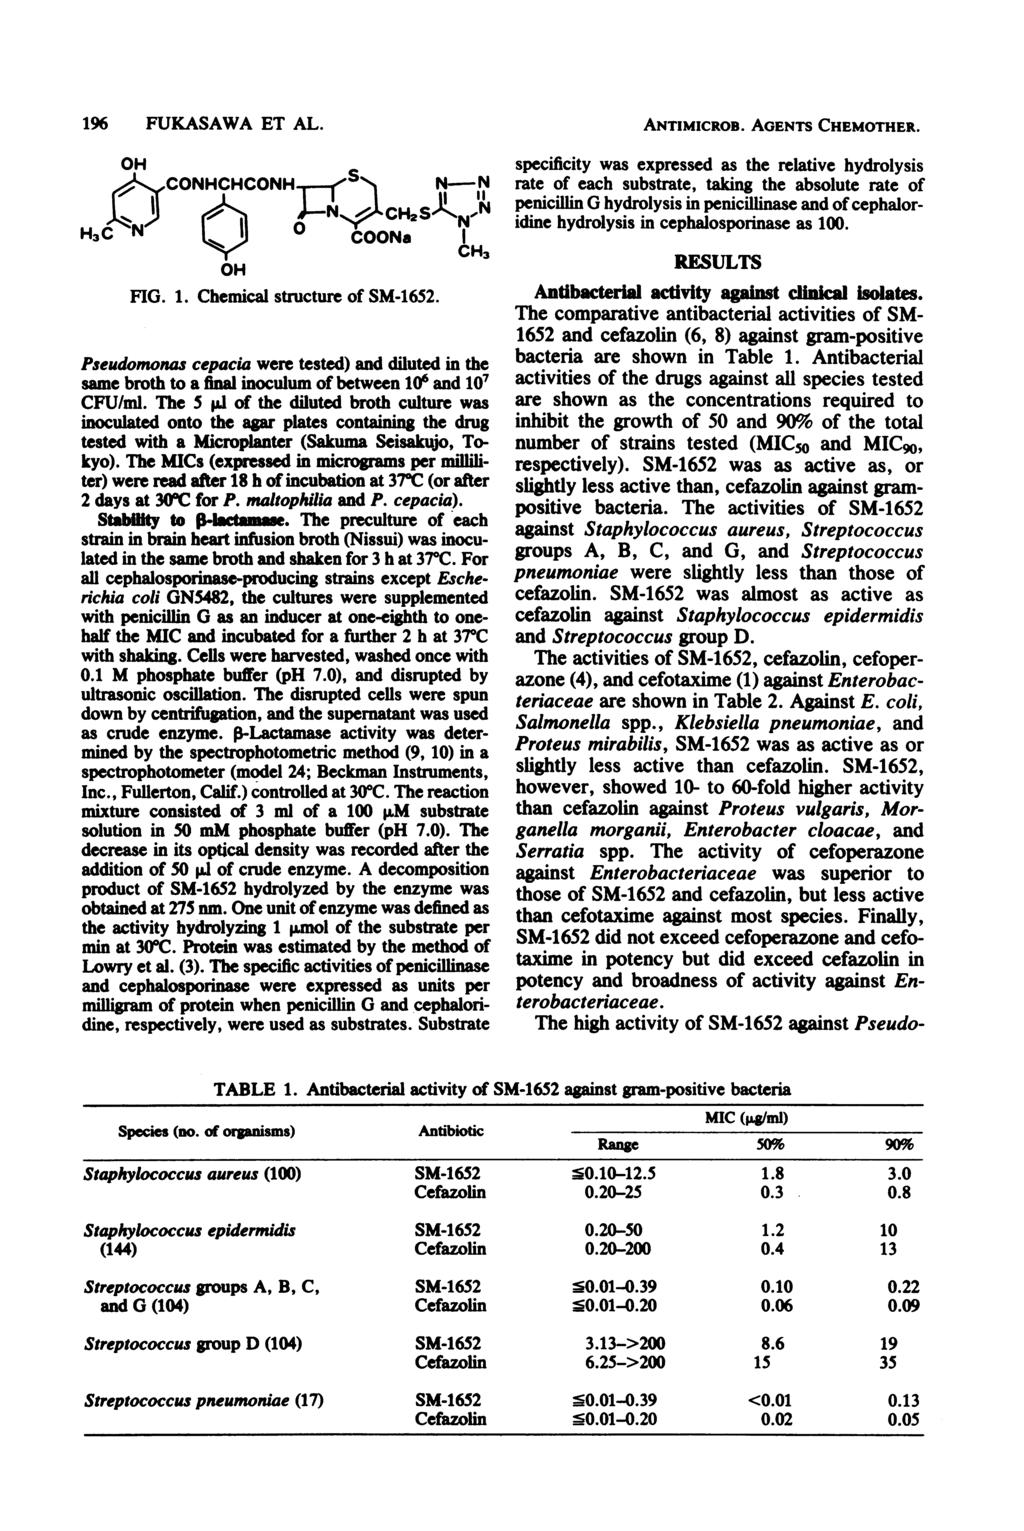 196 FUKASAWA ET AL. OH FIG. 1. Chemical structure of. Pseudomonas cepacia were tested) and diluted in the same broth to a final inoculum of between 106 and 107 CFU/ml.